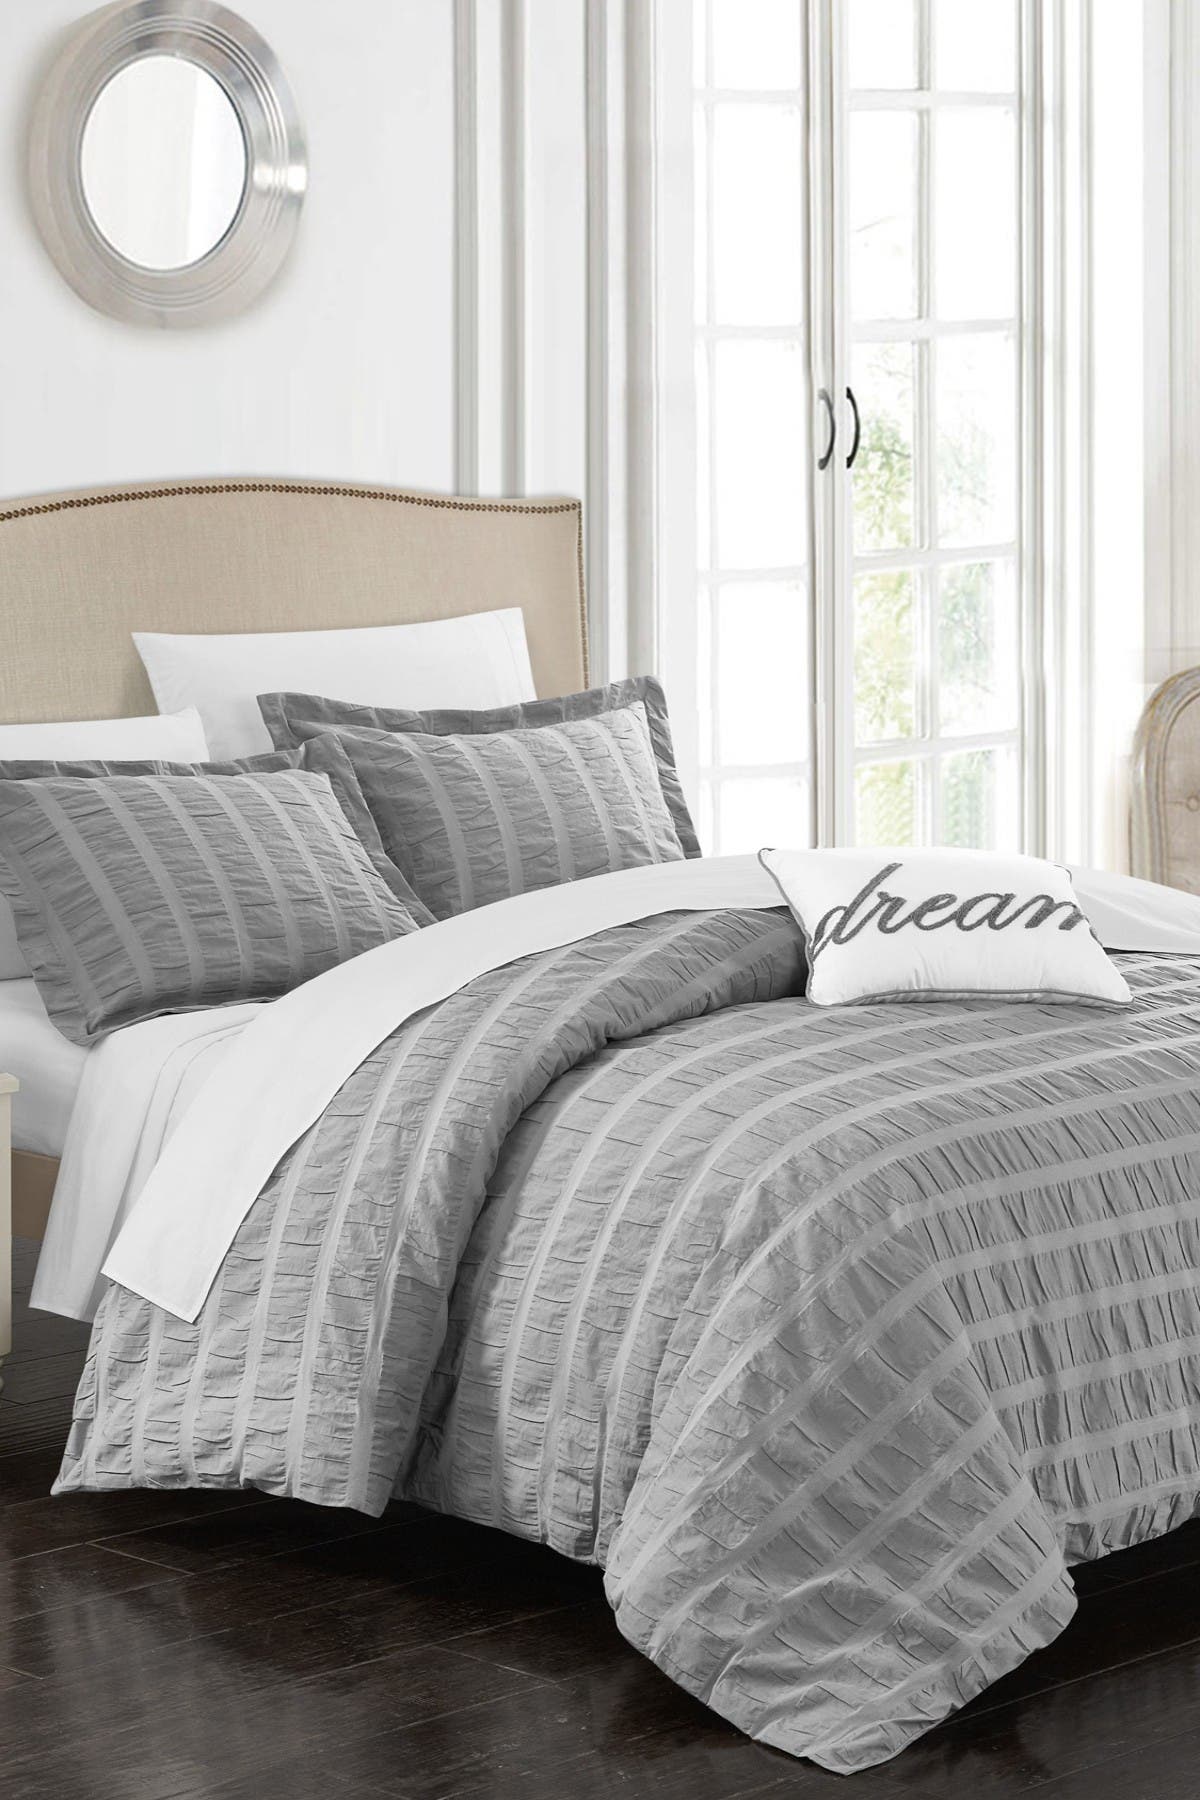 Chic Home Bedding Grey Calamba 200 Thread Count Ruffled Pleated King Duvet Cover 4 Piece Set Nordstrom Rack